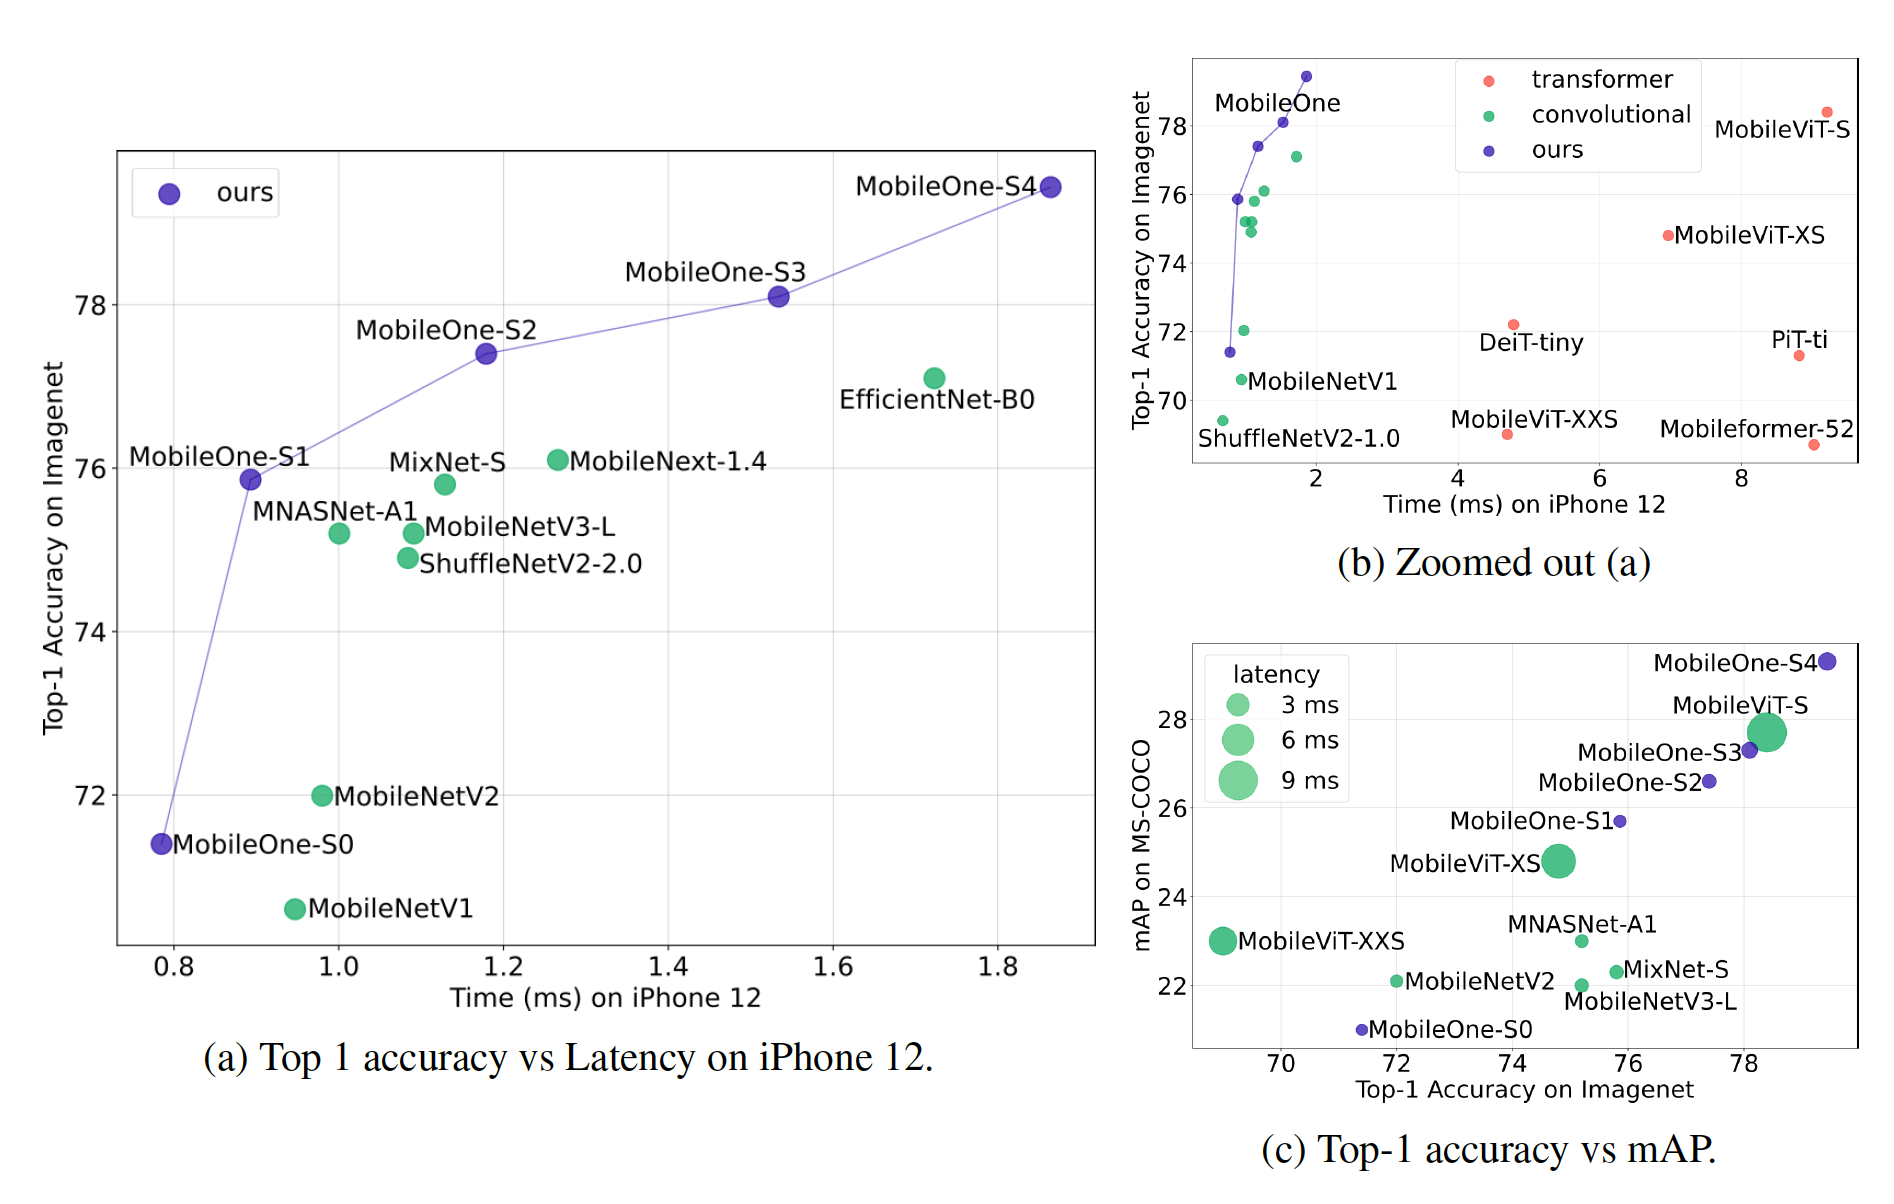 Comparisons of Top-1 accuracy on image classification vs latency on an iPhone 12